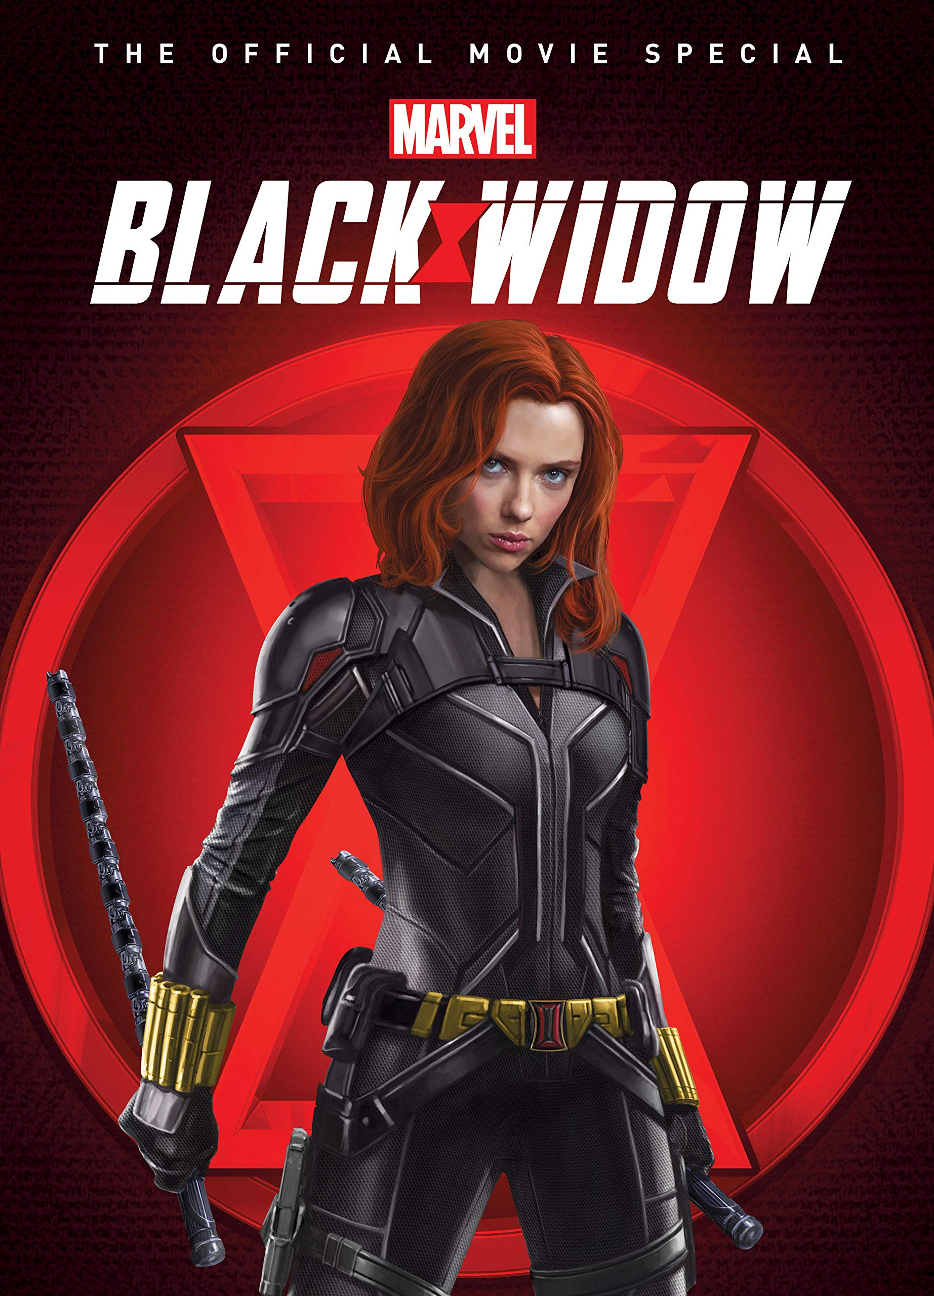 Marvel Studios' Black Widow: The Official Movie Special Book is Terrific